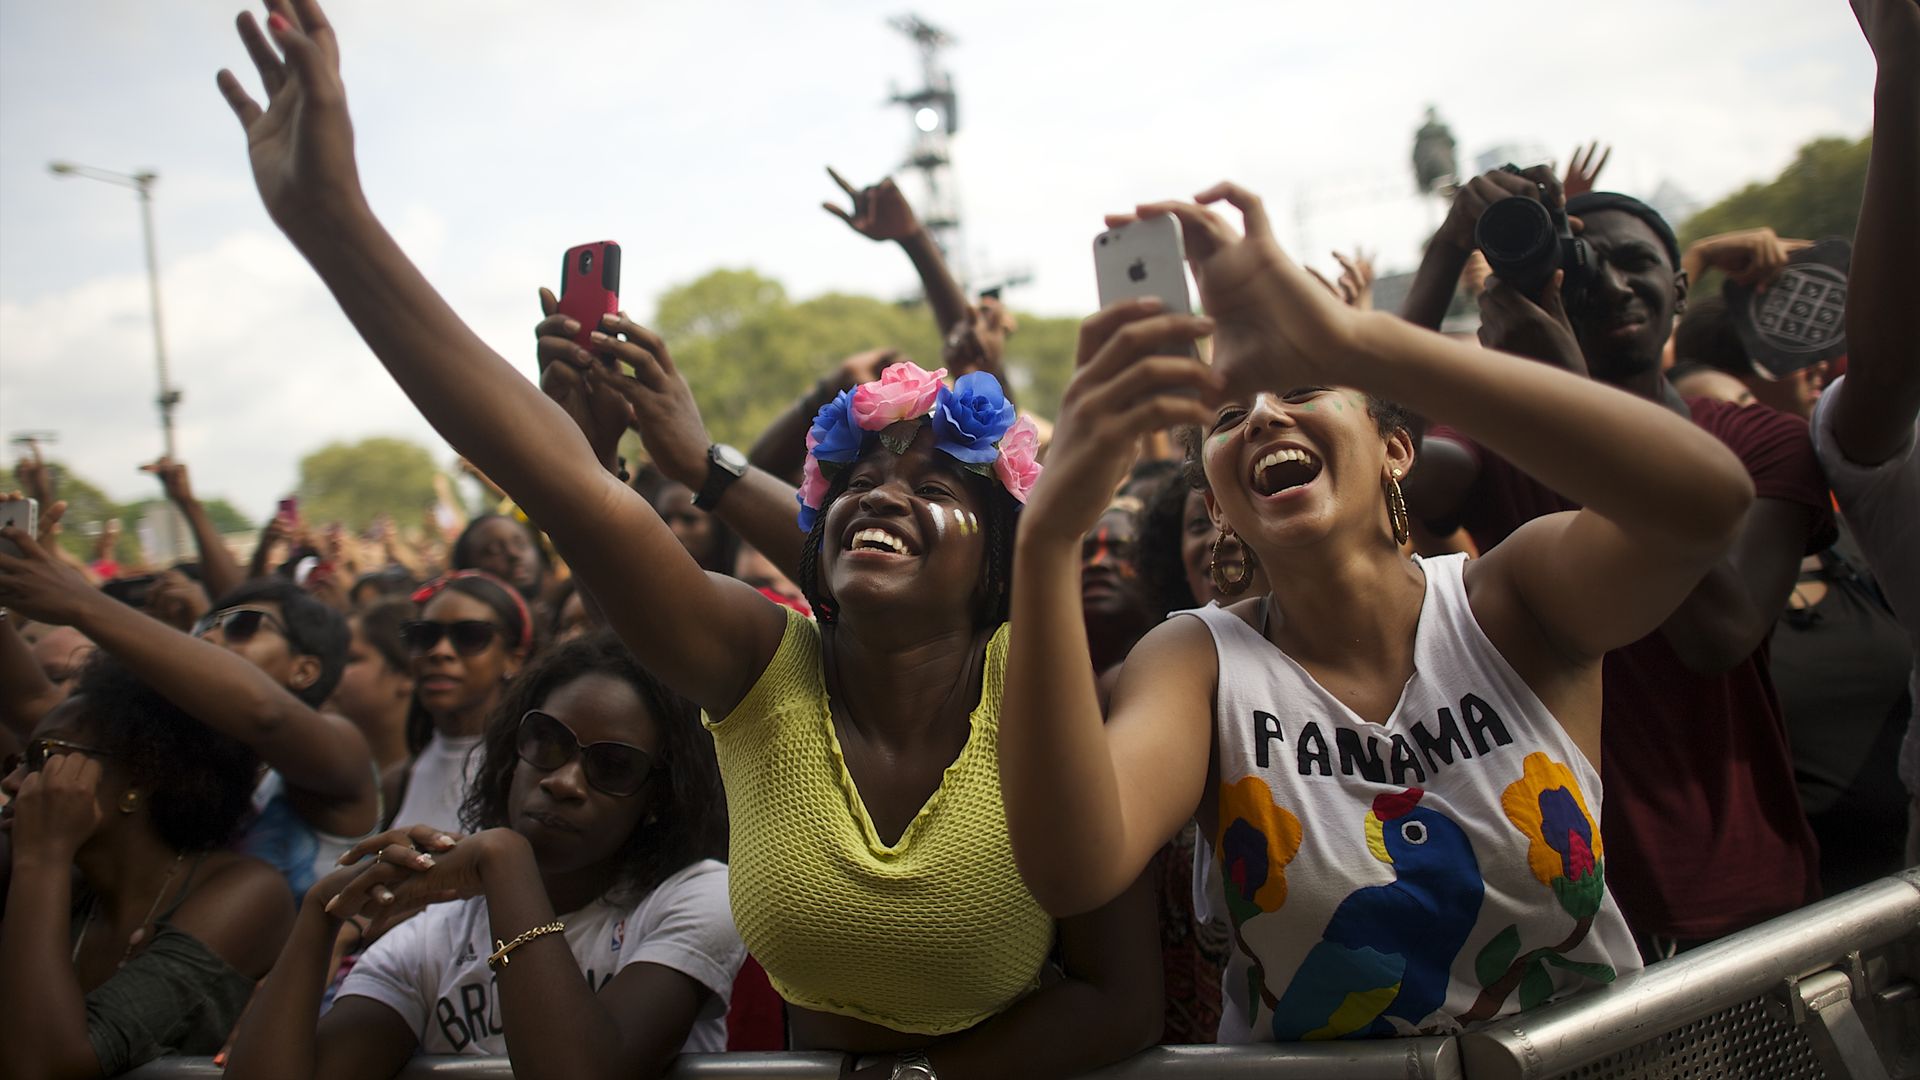 Crowds cheer at a music festival